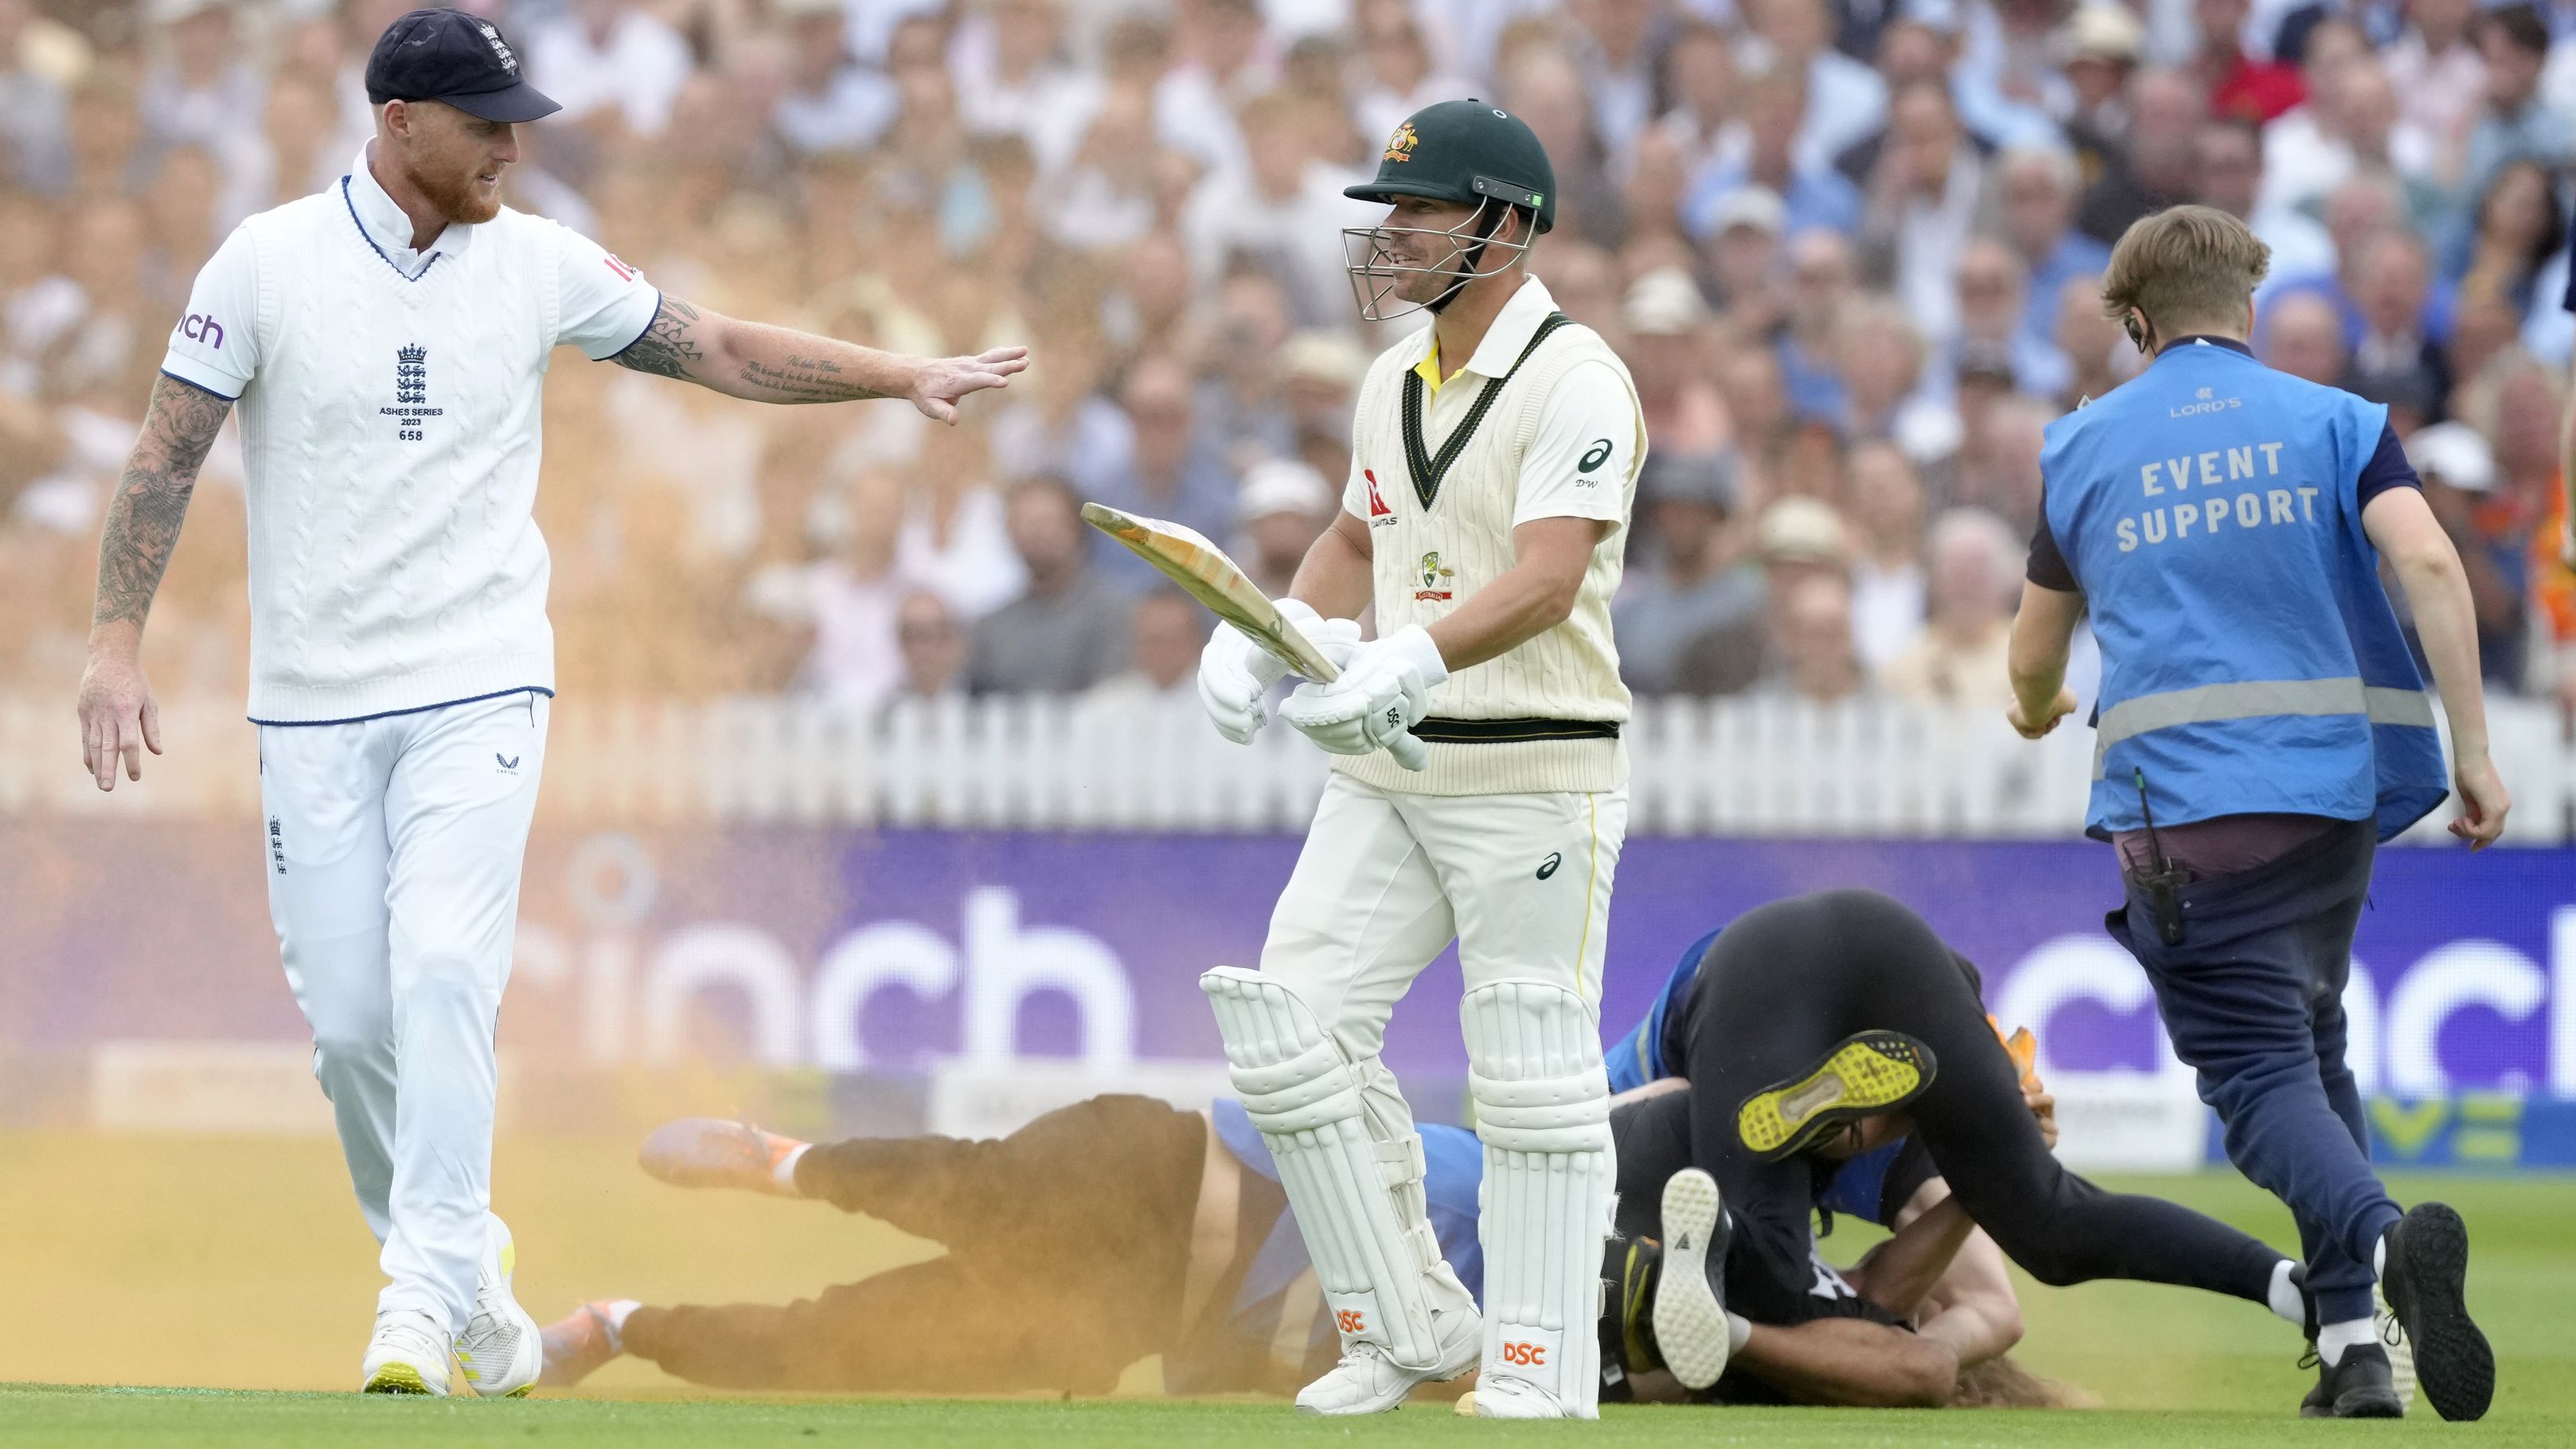 England&#x27;s Ben Stokes (left) and Australia&#x27;s David Warner react as a Just Stop Oil protester is apprehended after they threw colored powder on the pitch during day one of the second Ashes Test at Lord&#x27;s.